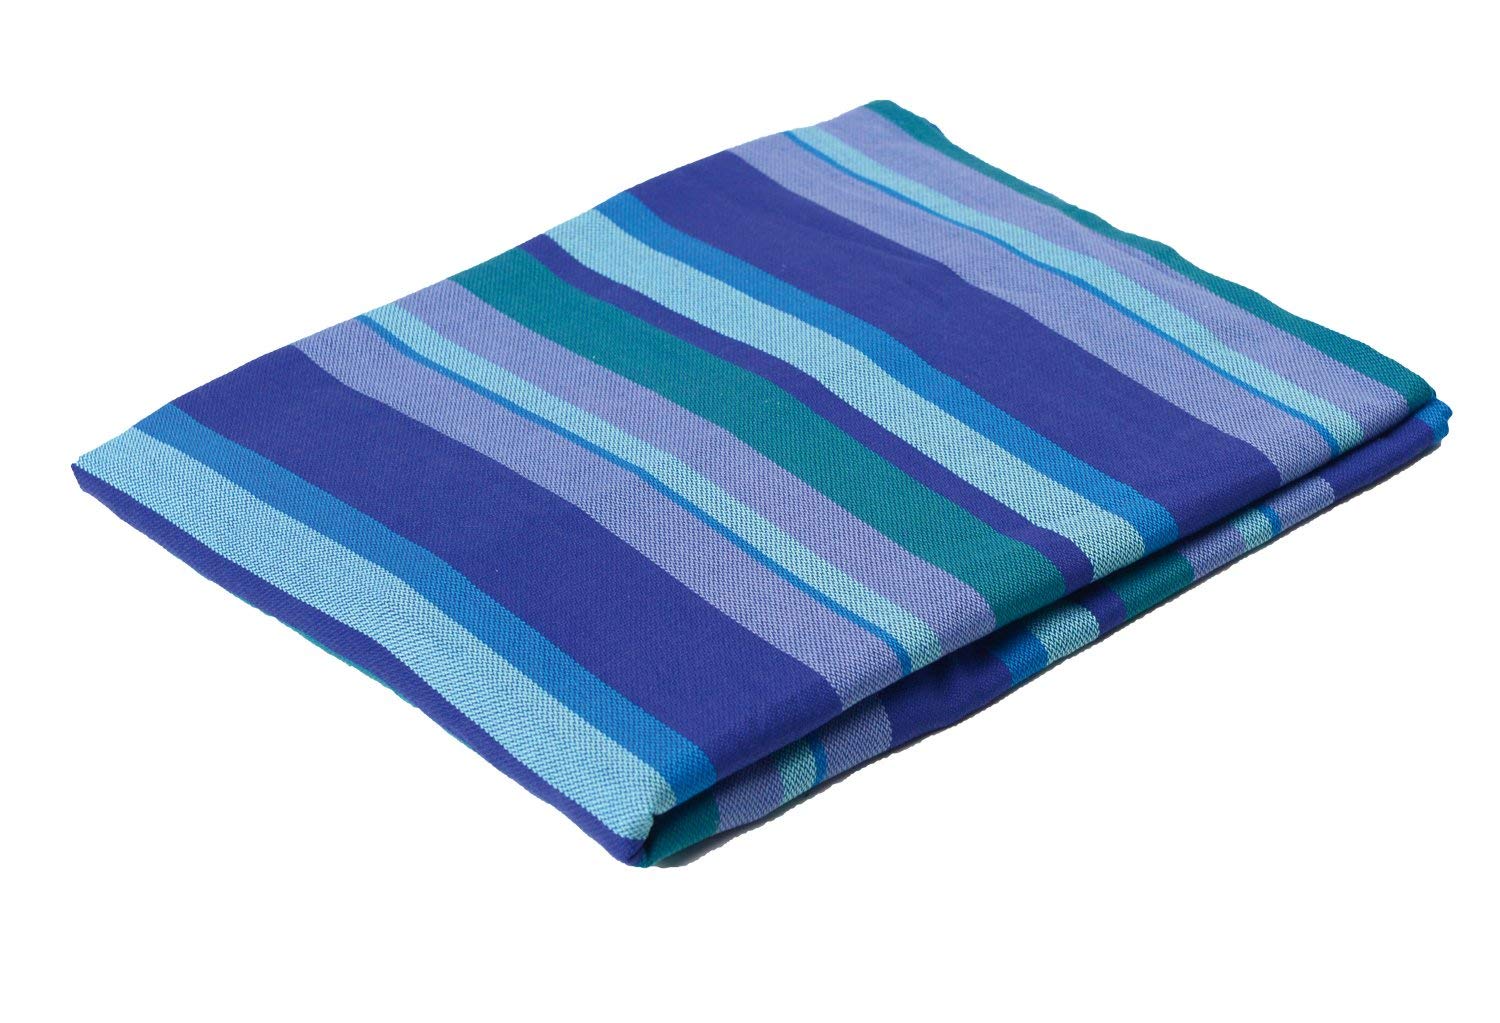 AMAZONAS Laguna Baby Sling - Test Winner at Stiftung Warentest with Top Score 1.7-510 cm 0-3 Years to 15 kg in Blue Stripes